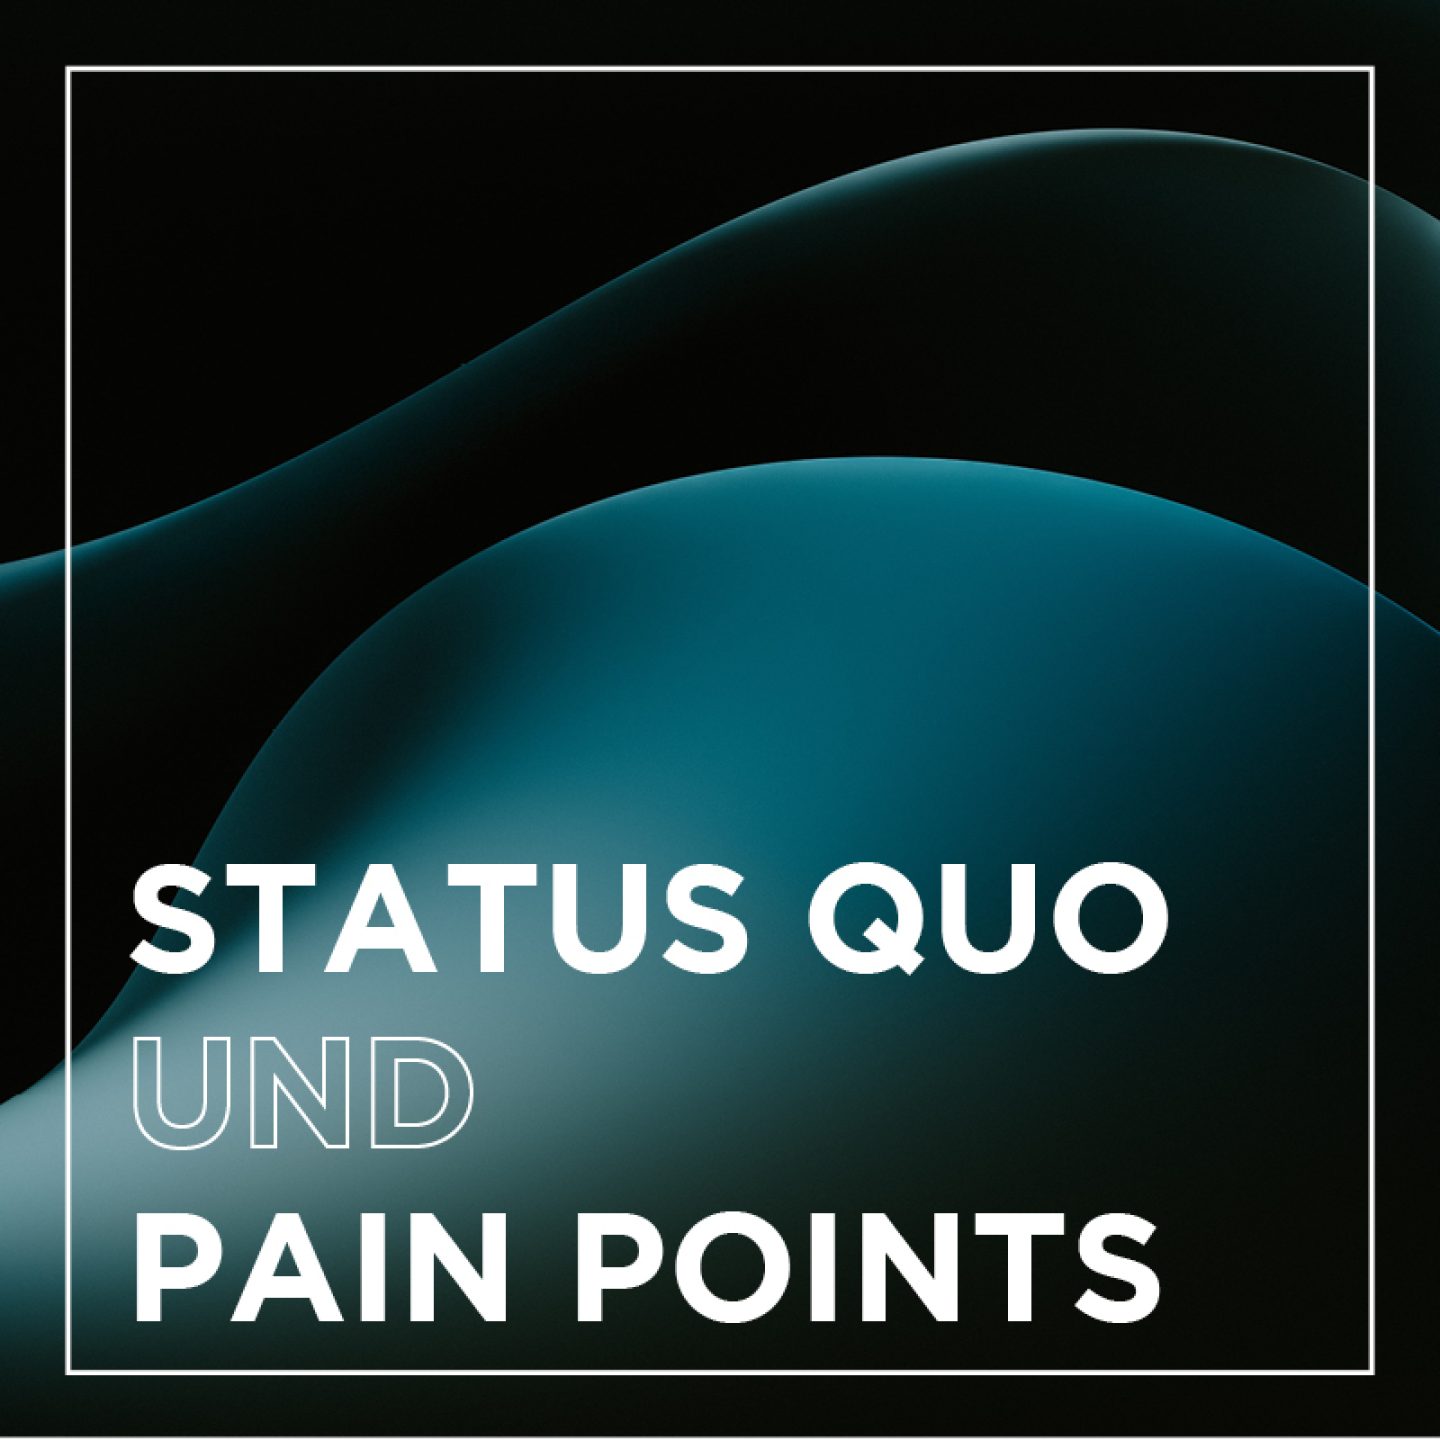 Kacheln group reporting status quo und pain points